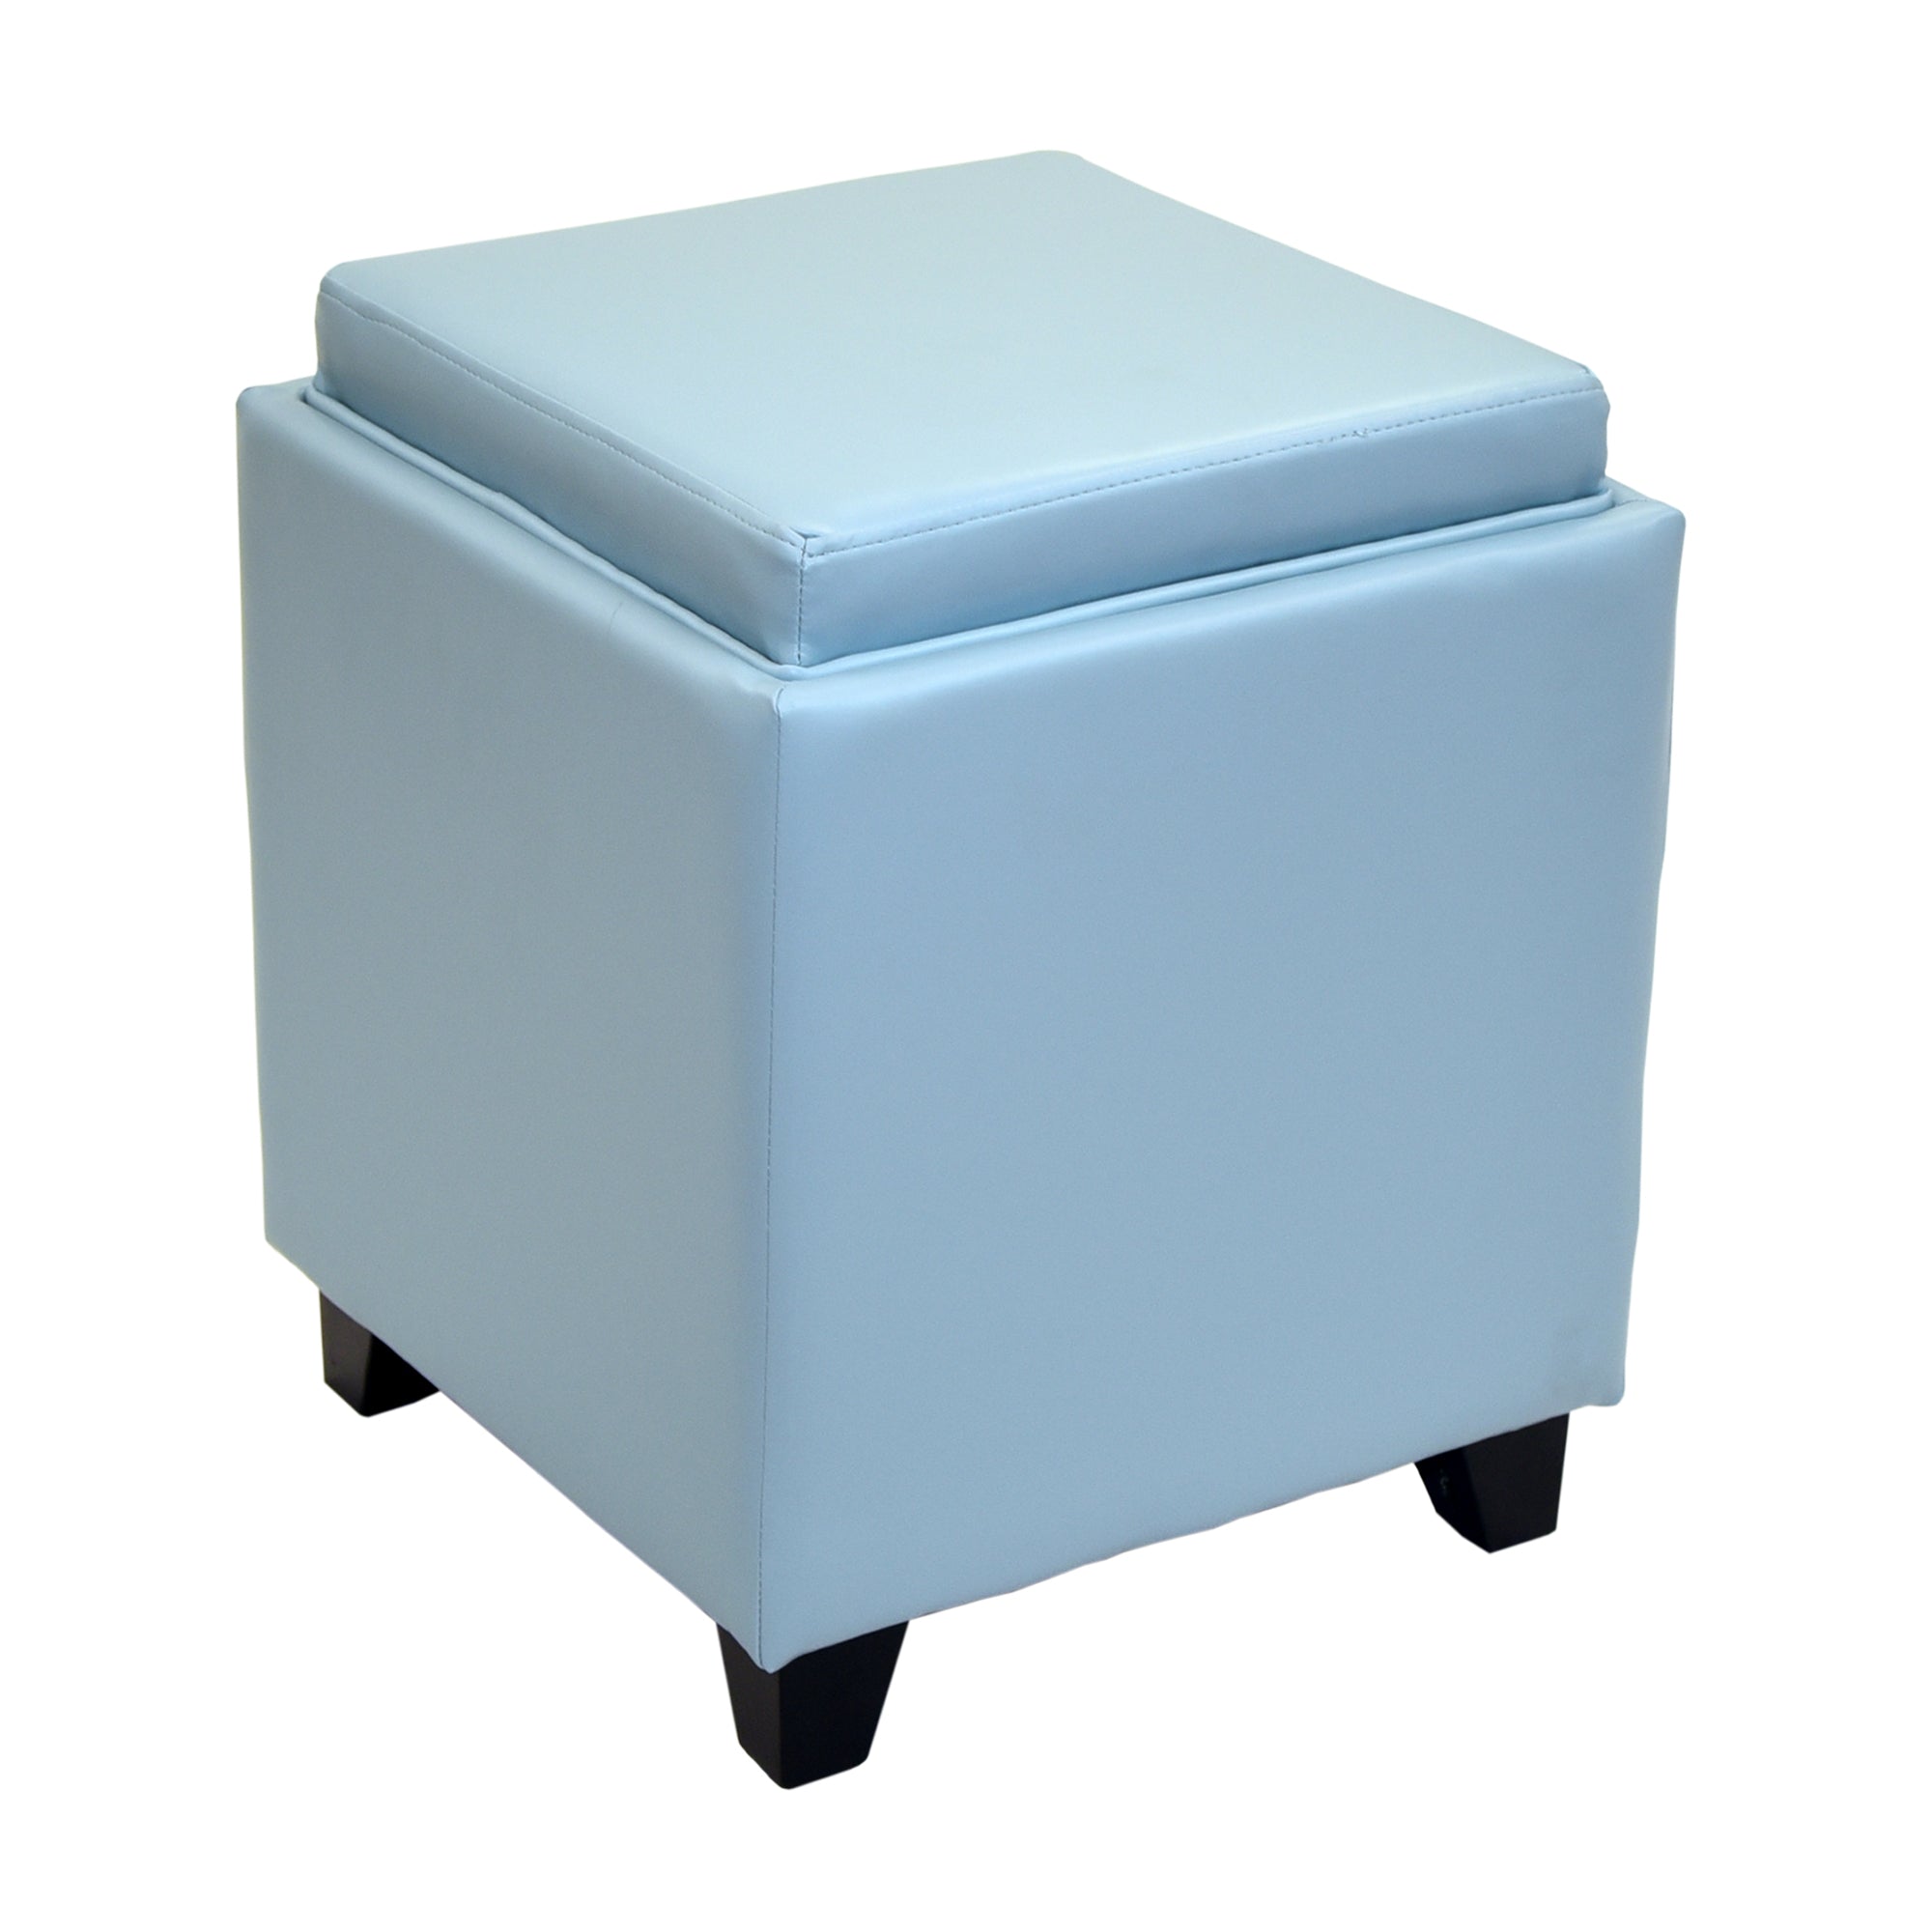 Armen Living Lc530otlesb Rainbow Contemporary Storage Ottoman With Tray In Sky Blue Bonded Leather